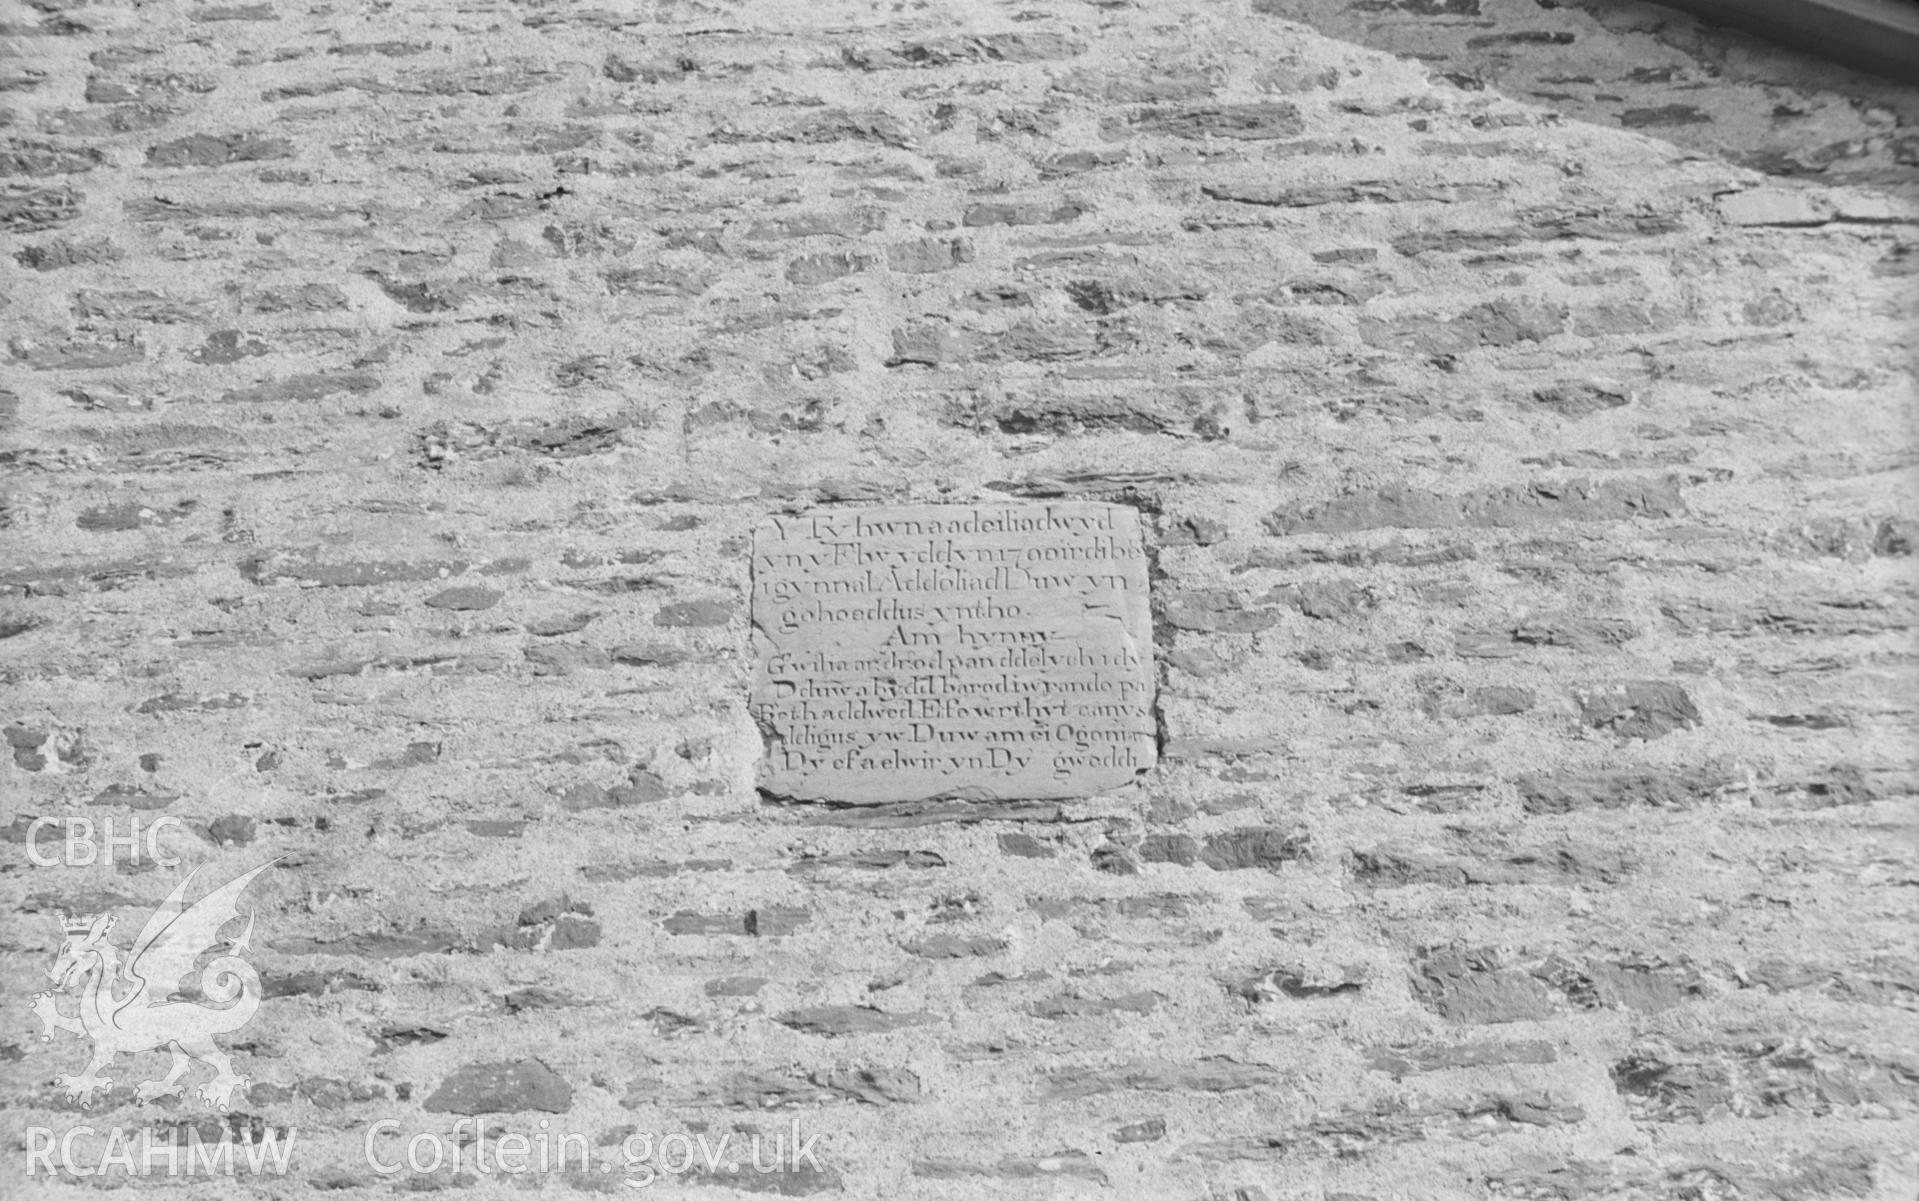 Digital copy of a black and white negative showing detailed view of 1790 datestone on the wall of Cribyn Unitarian Chapel. Photographed by Arthur O. Chater in August 1967.